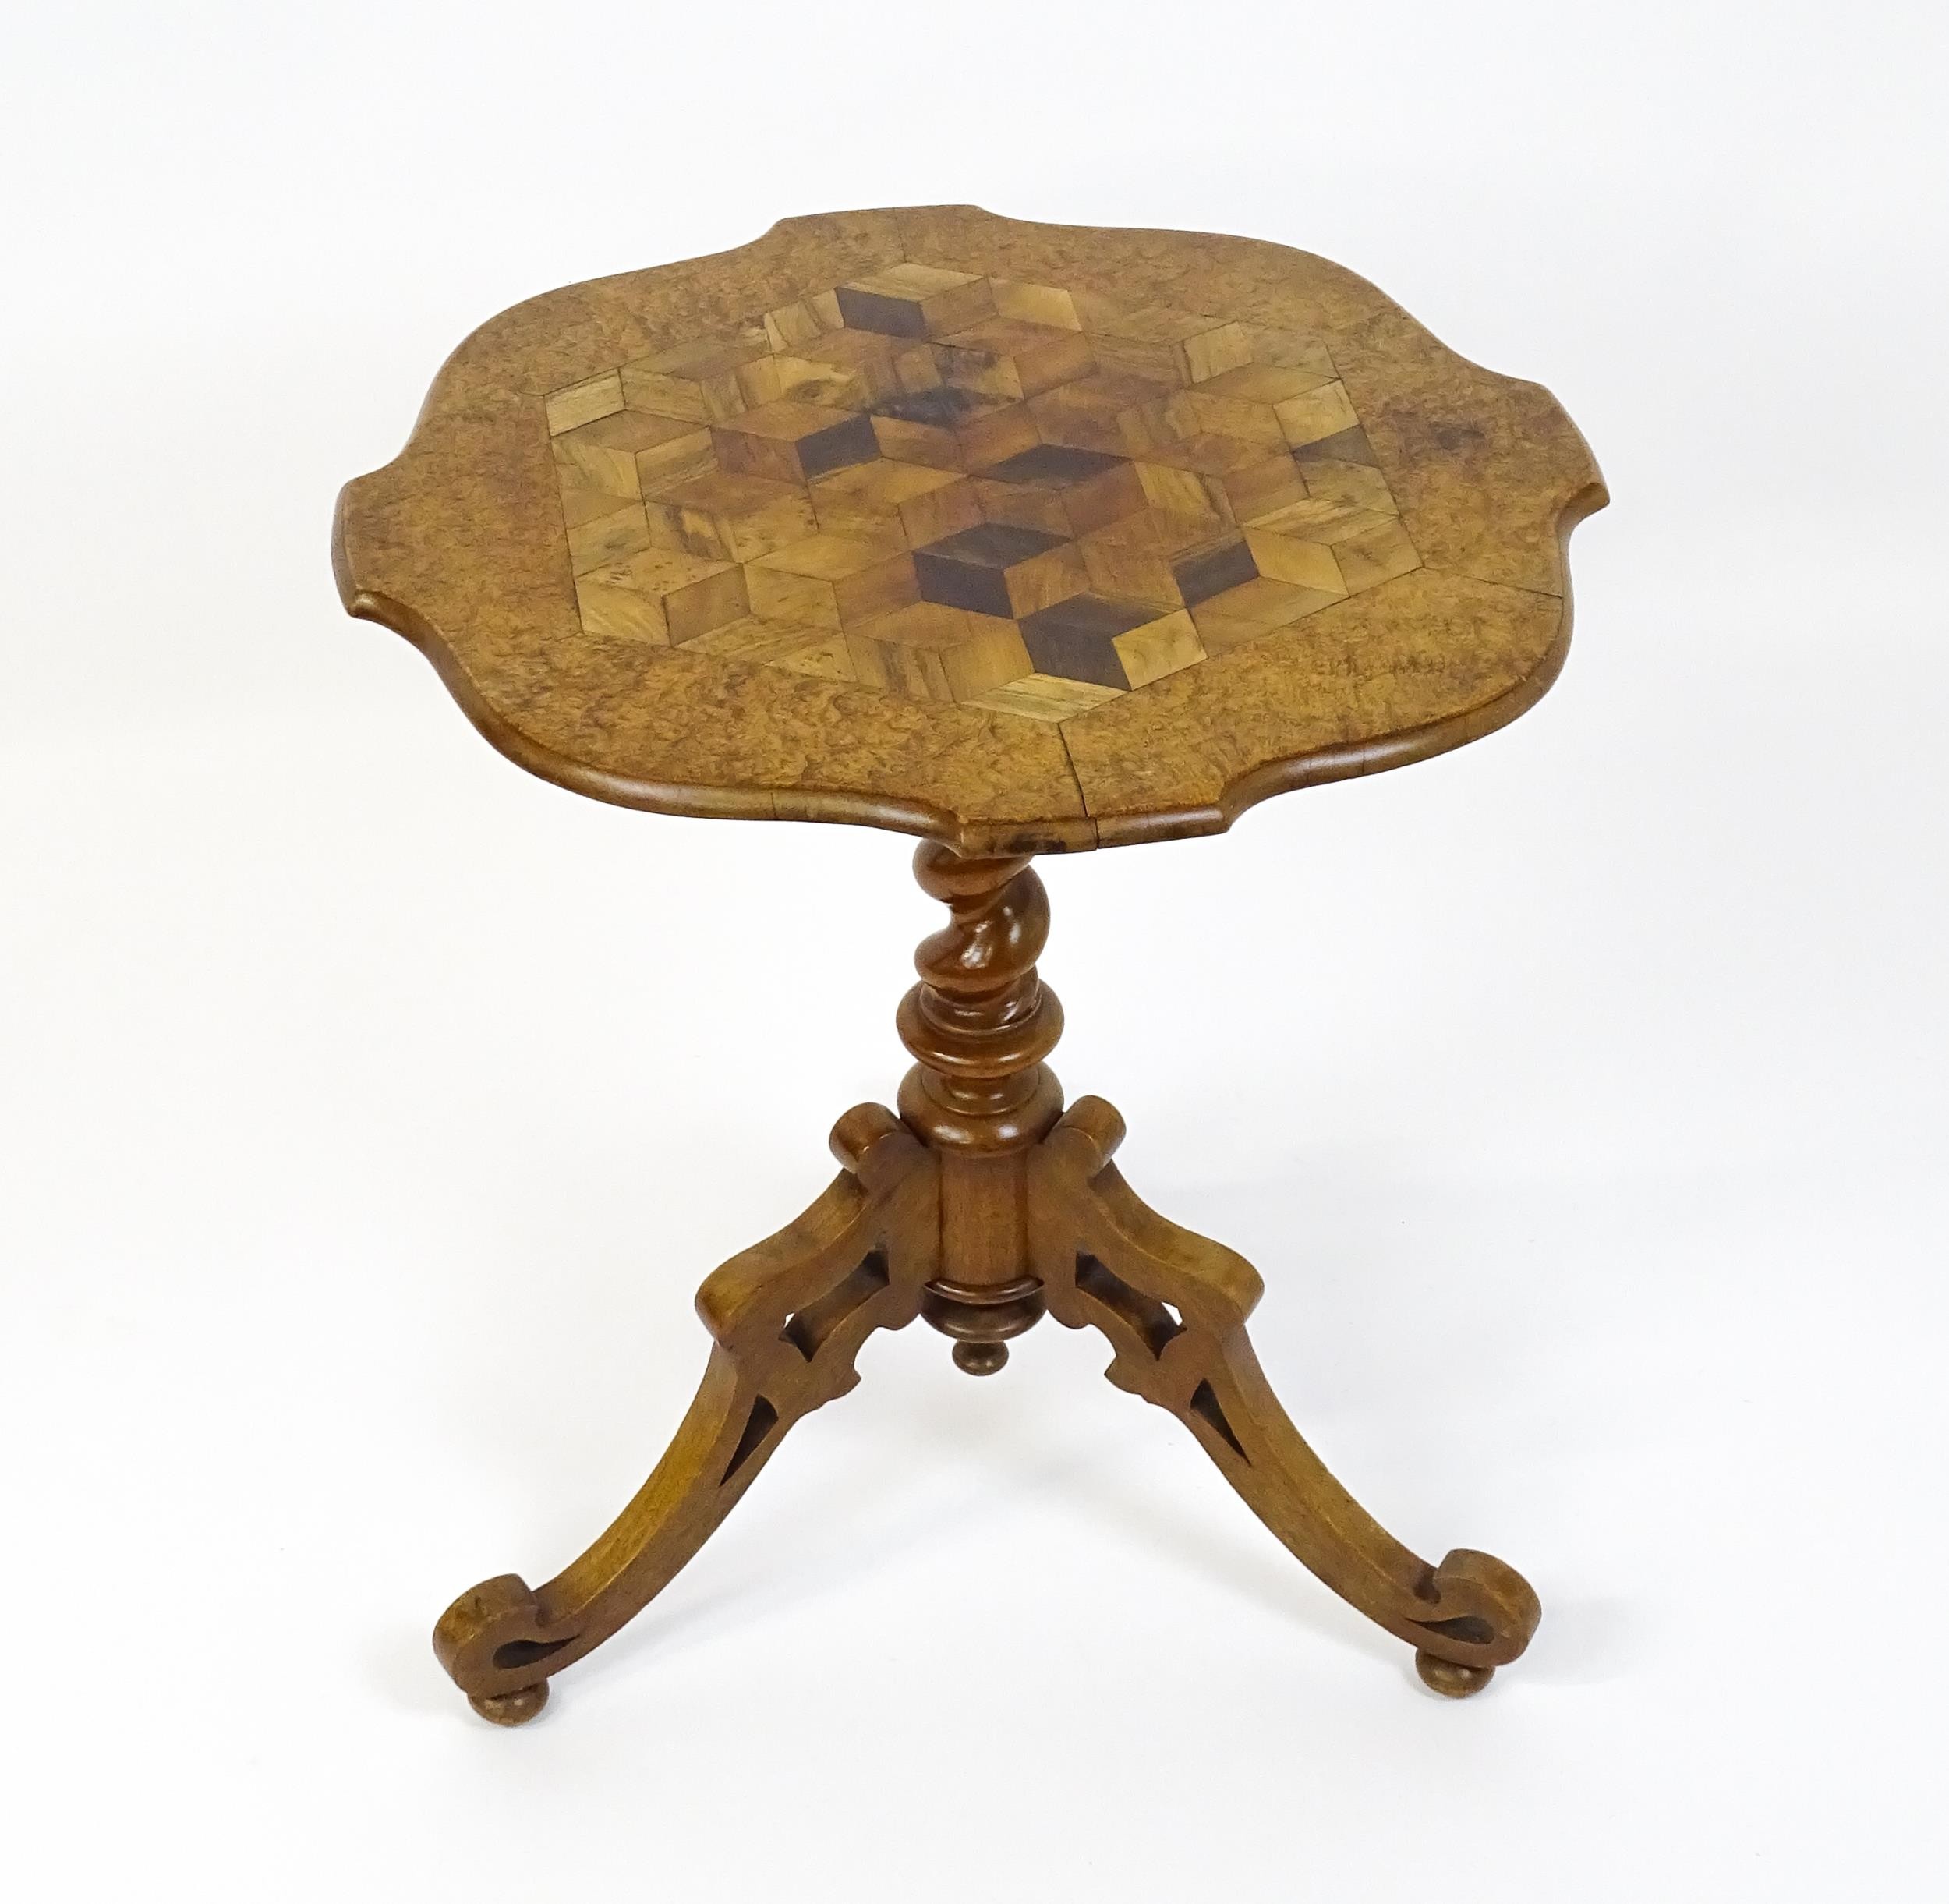 A 19thC tripod table with a burr amboyna veneered top surrounding a central parquetry style sample - Image 9 of 10